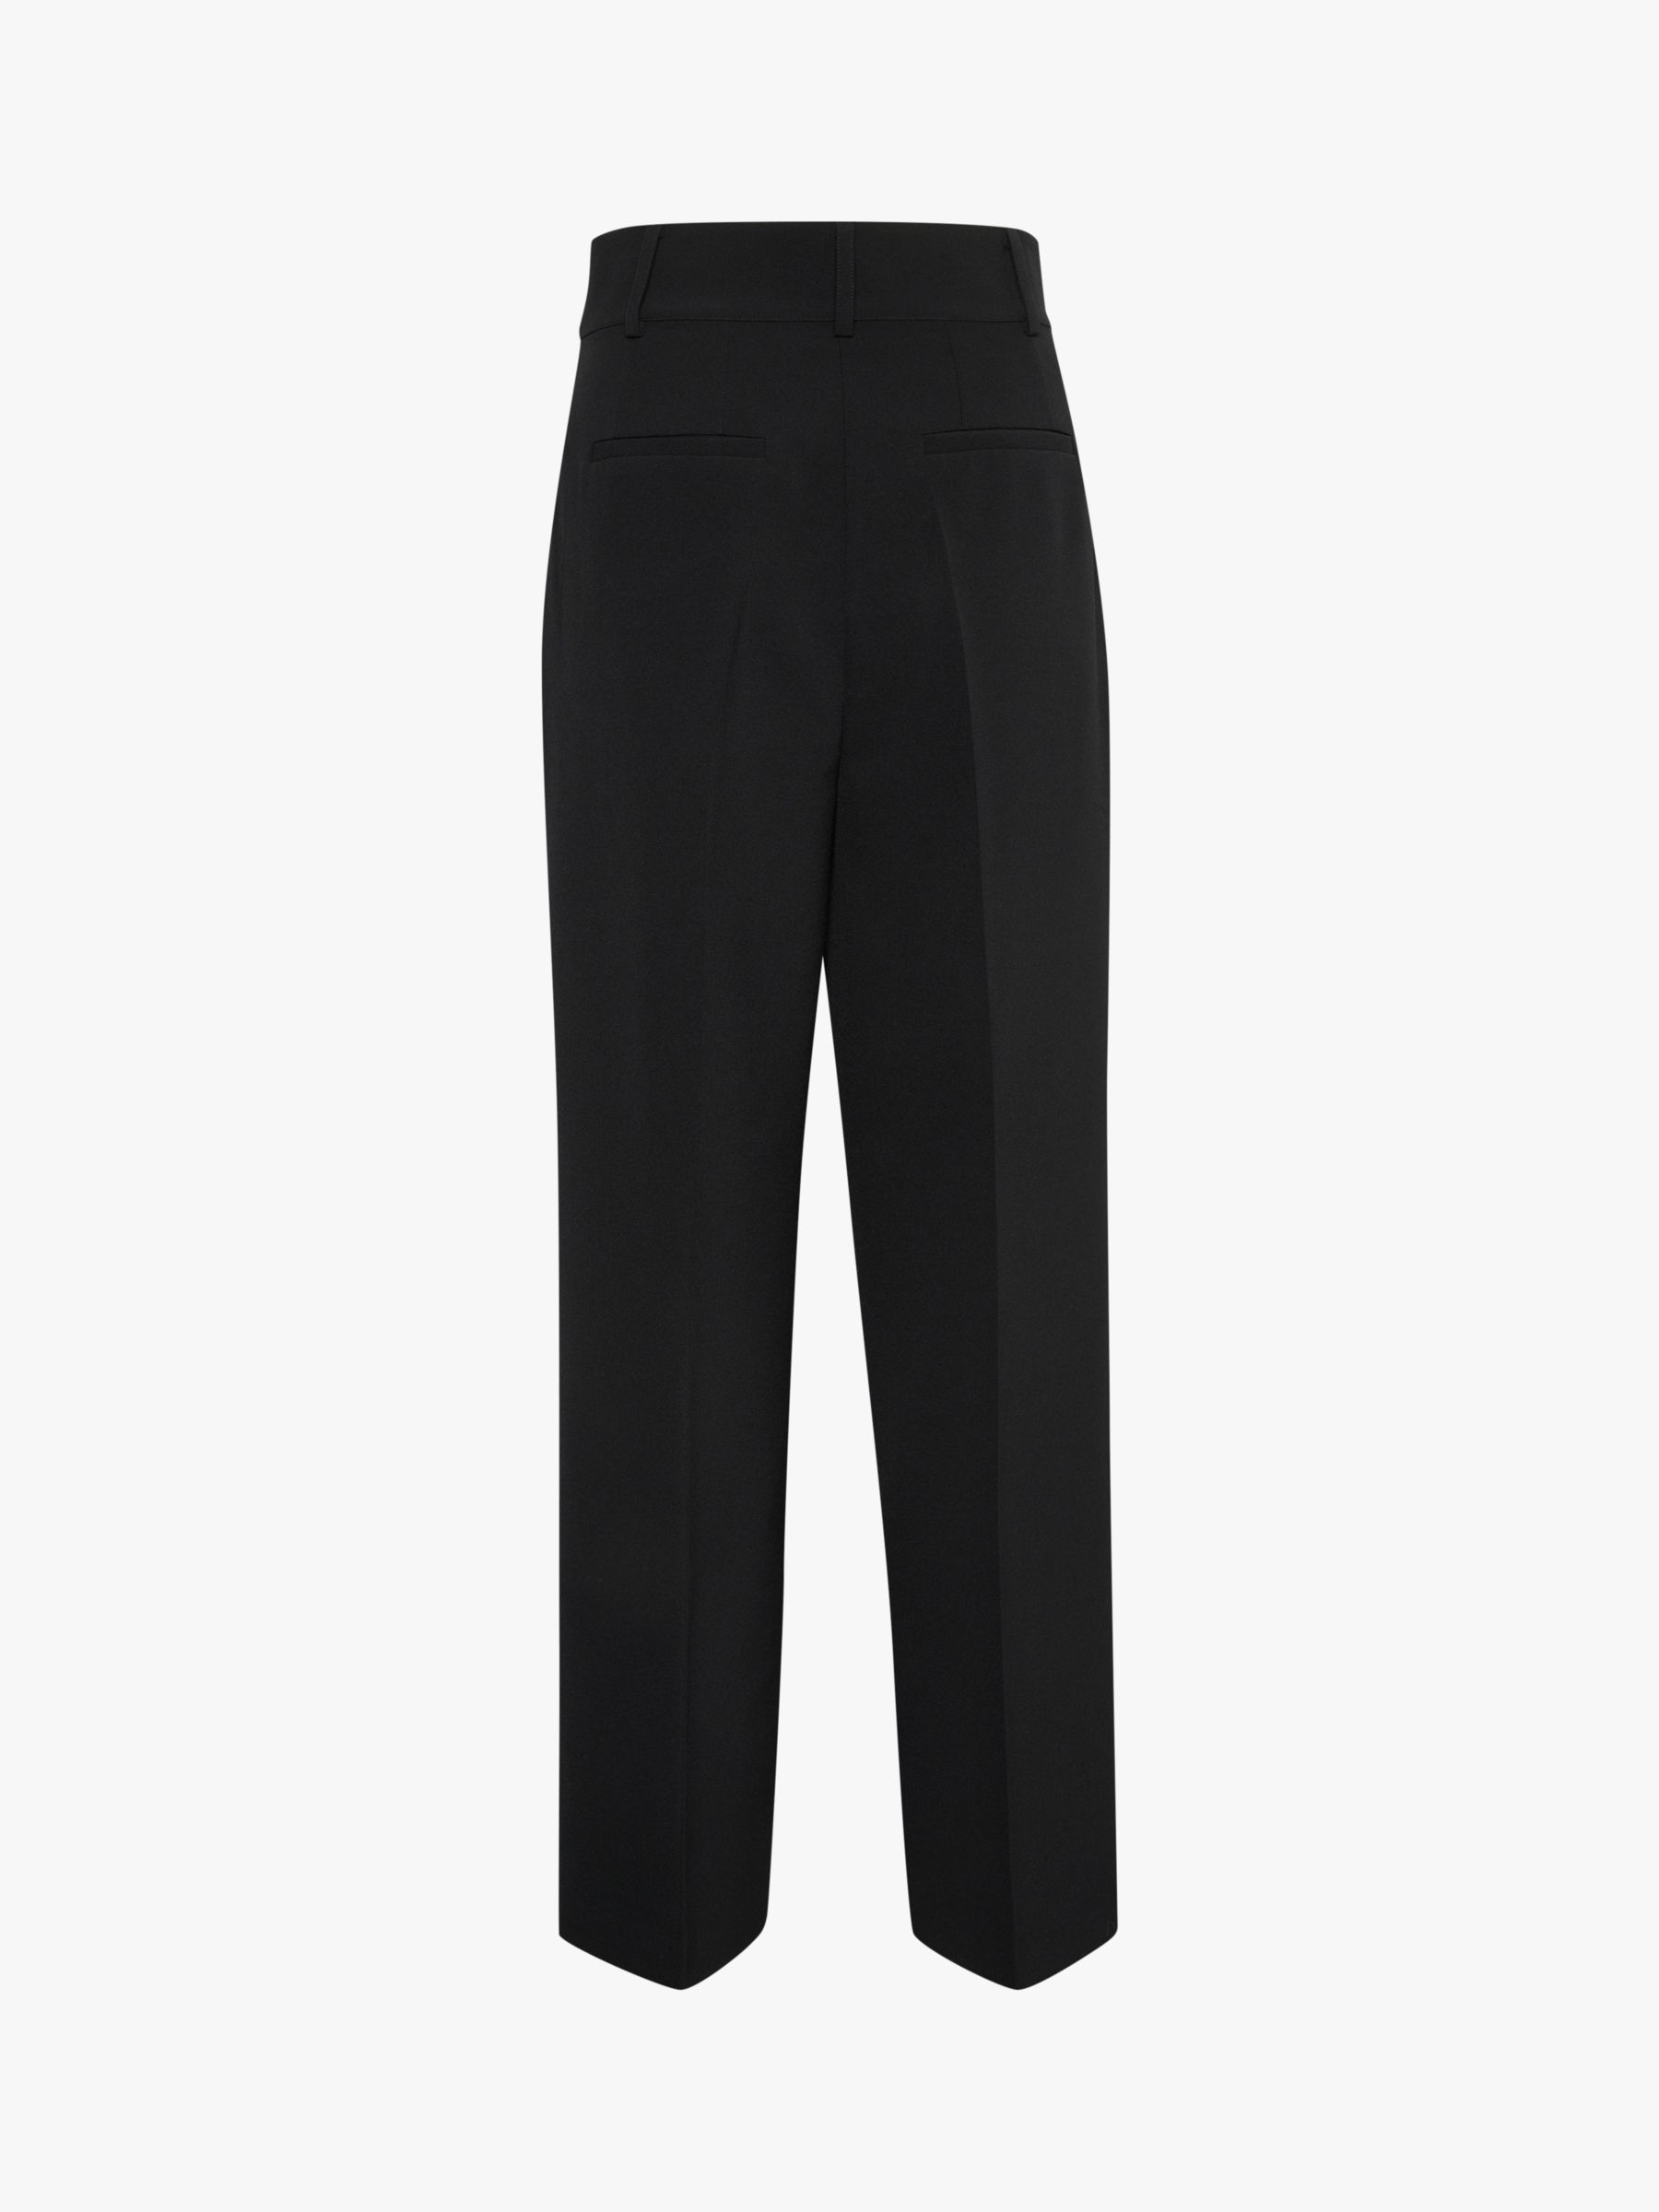 MY ESSENTIAL WARDROBE Tailored Wide Leg Trousers, Black, 16